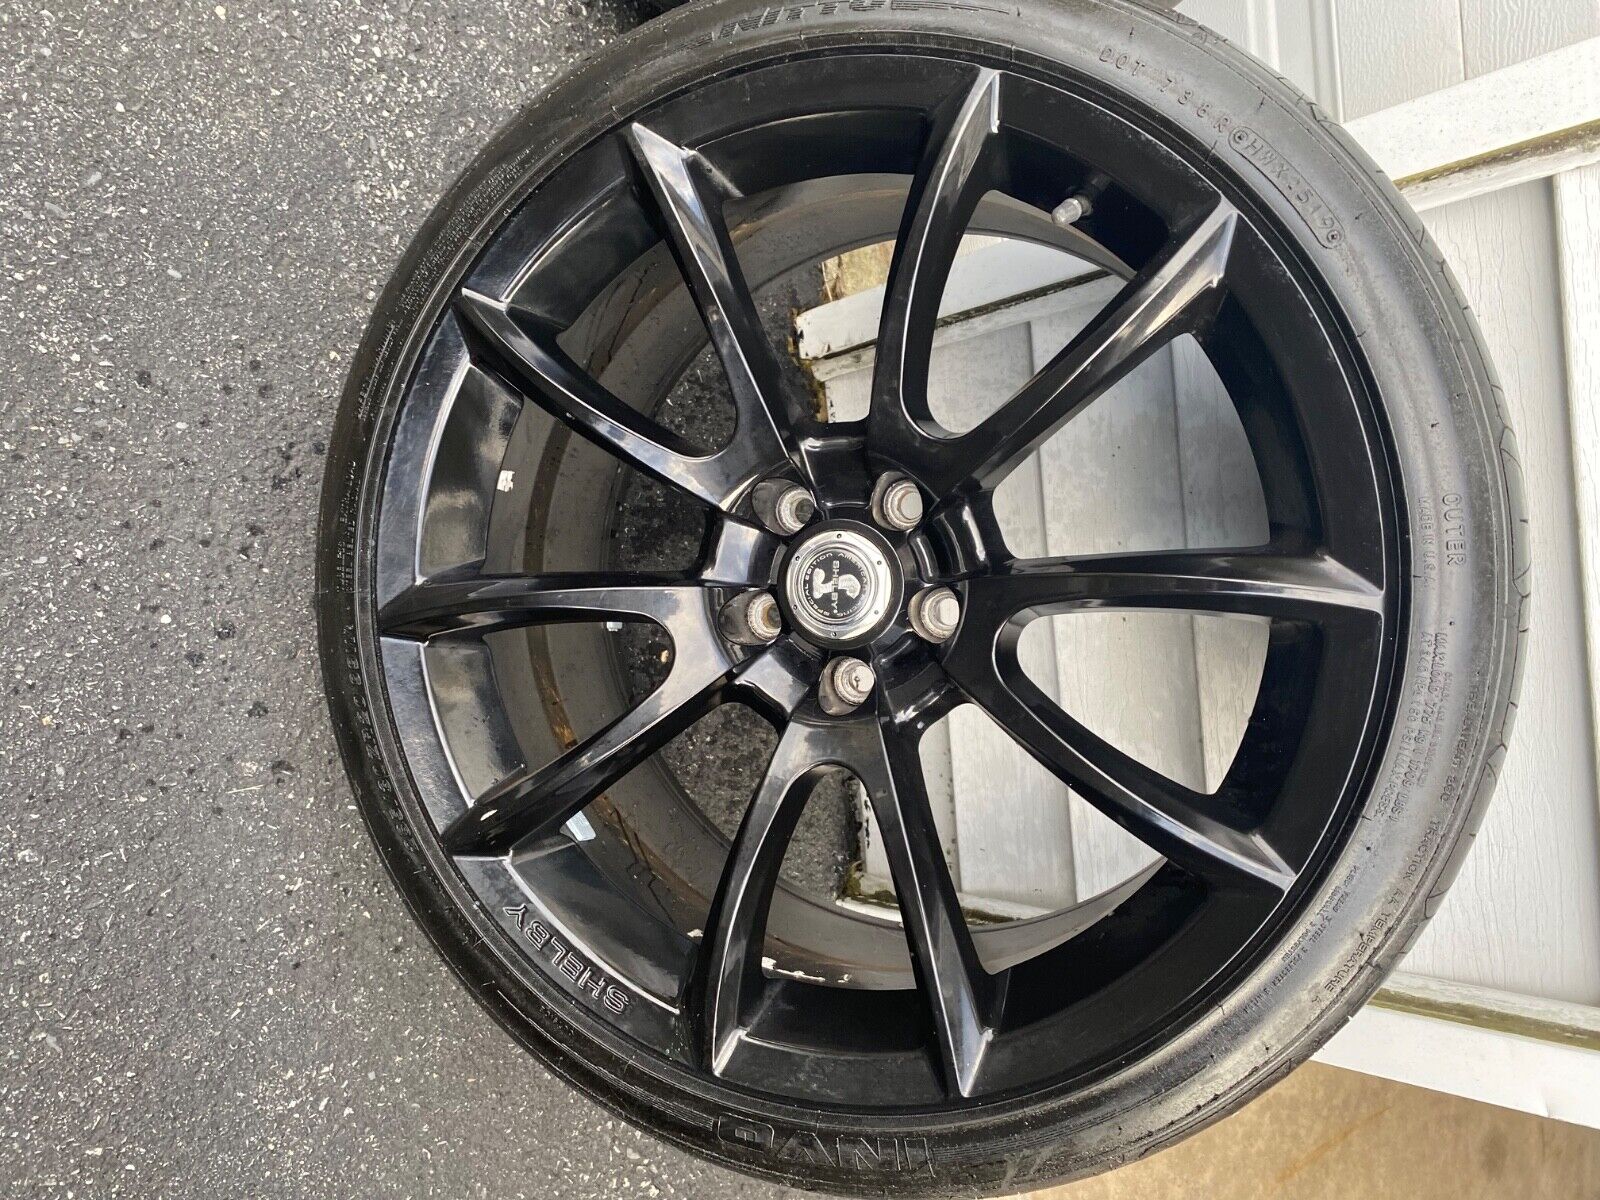 20 inch black Shelby Cobra Mustang original stamped wheels and tires.